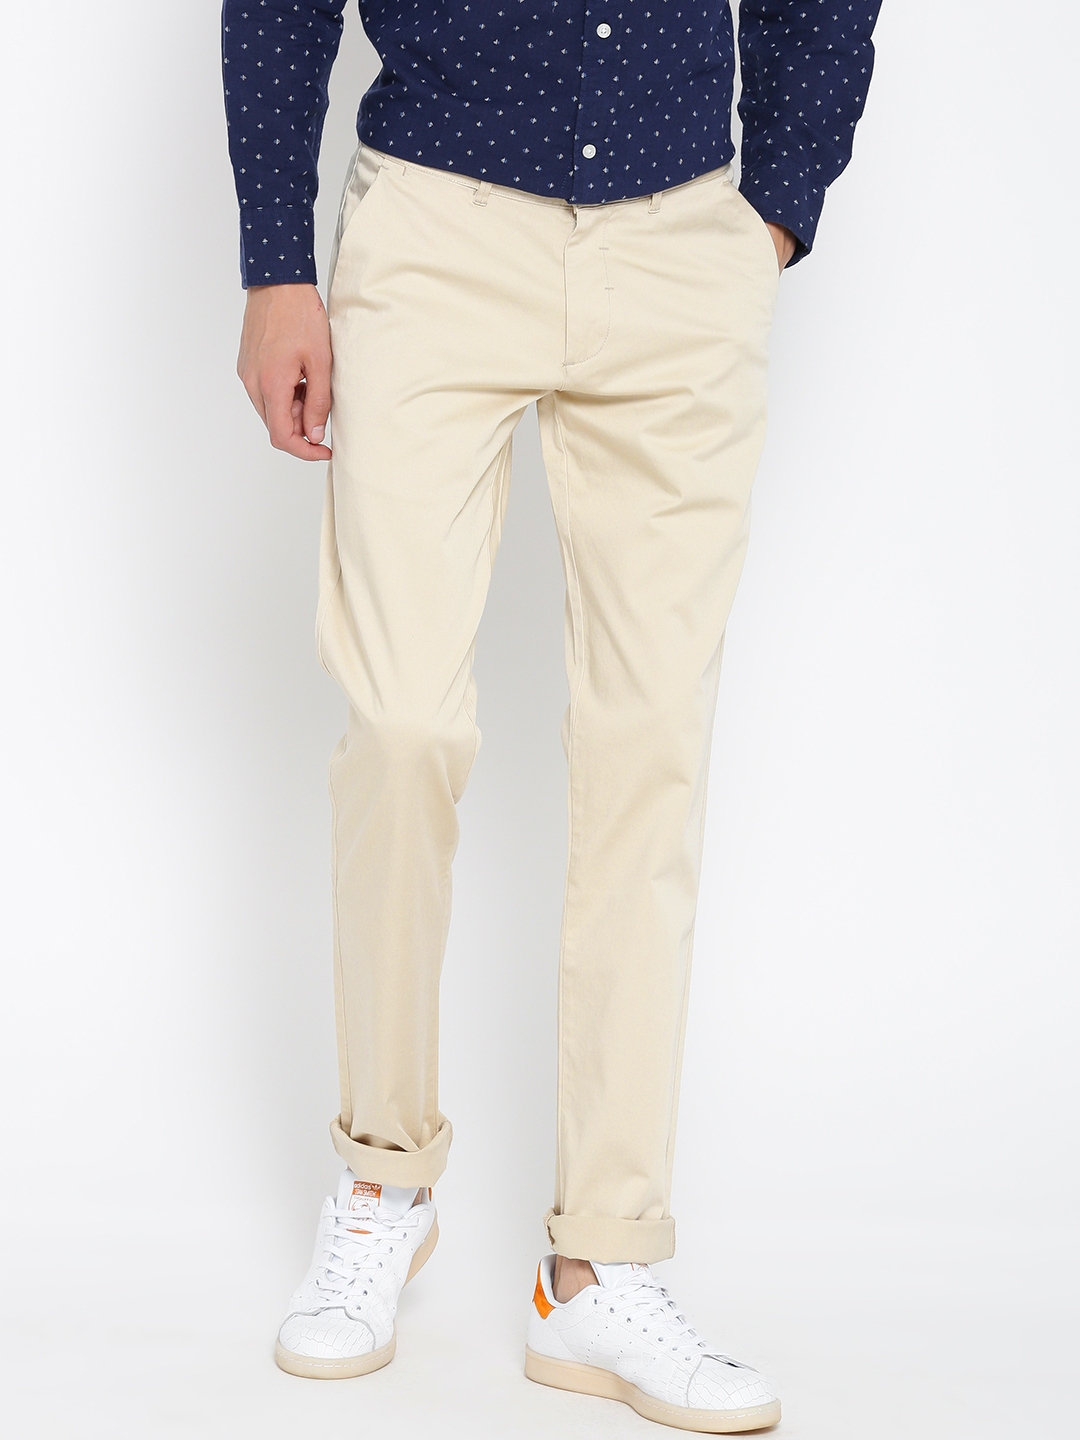 Buy Red Tape Mens Chinos RCT0017Beige34 at Amazonin